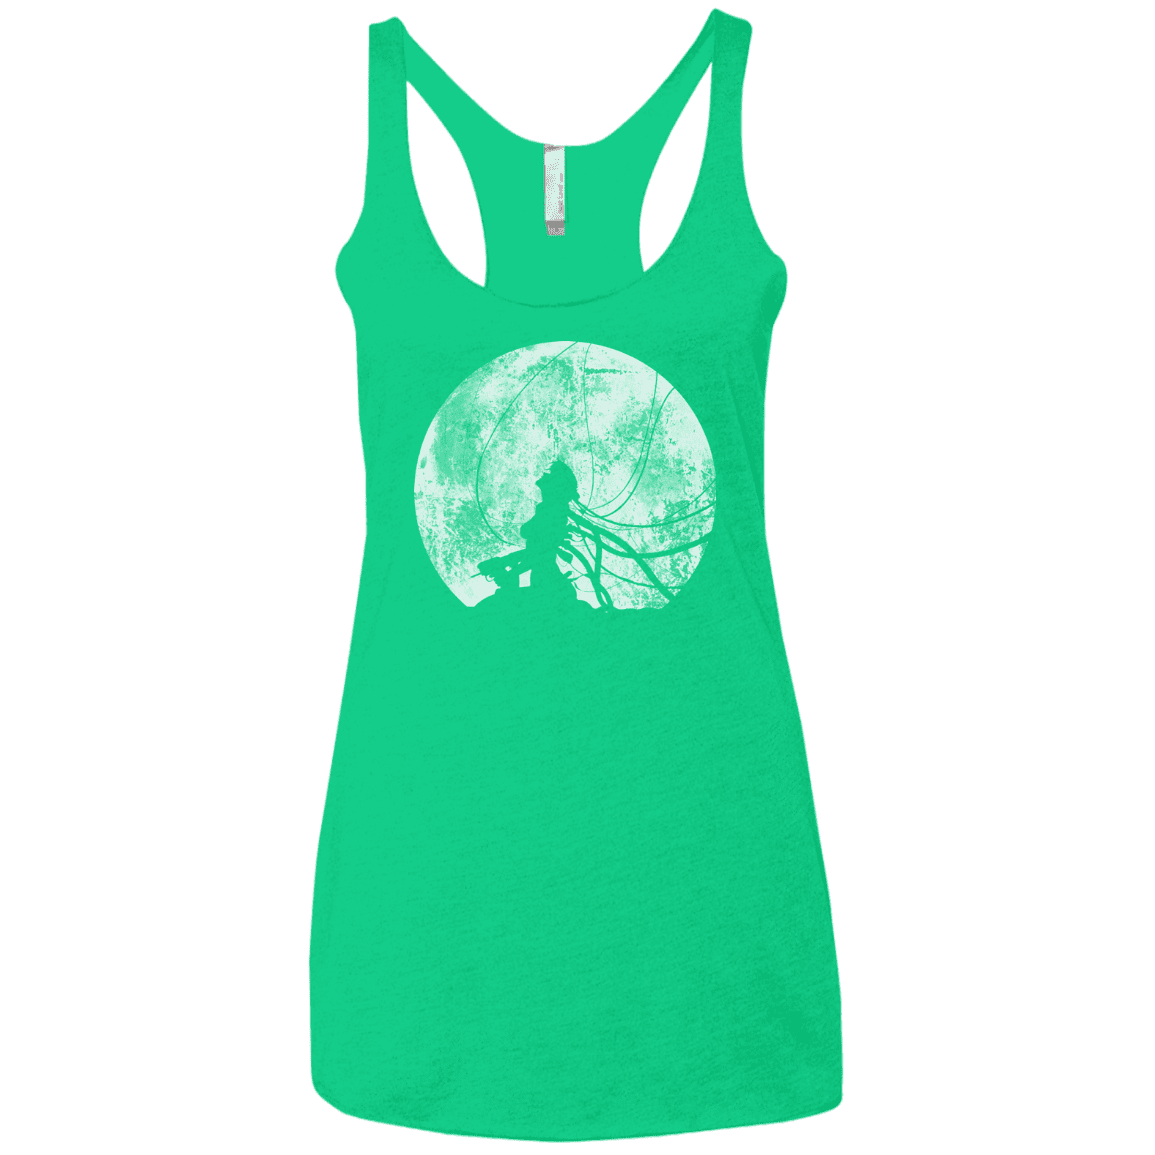 T-Shirts Envy / X-Small Shell of a Ghost Women's Triblend Racerback Tank